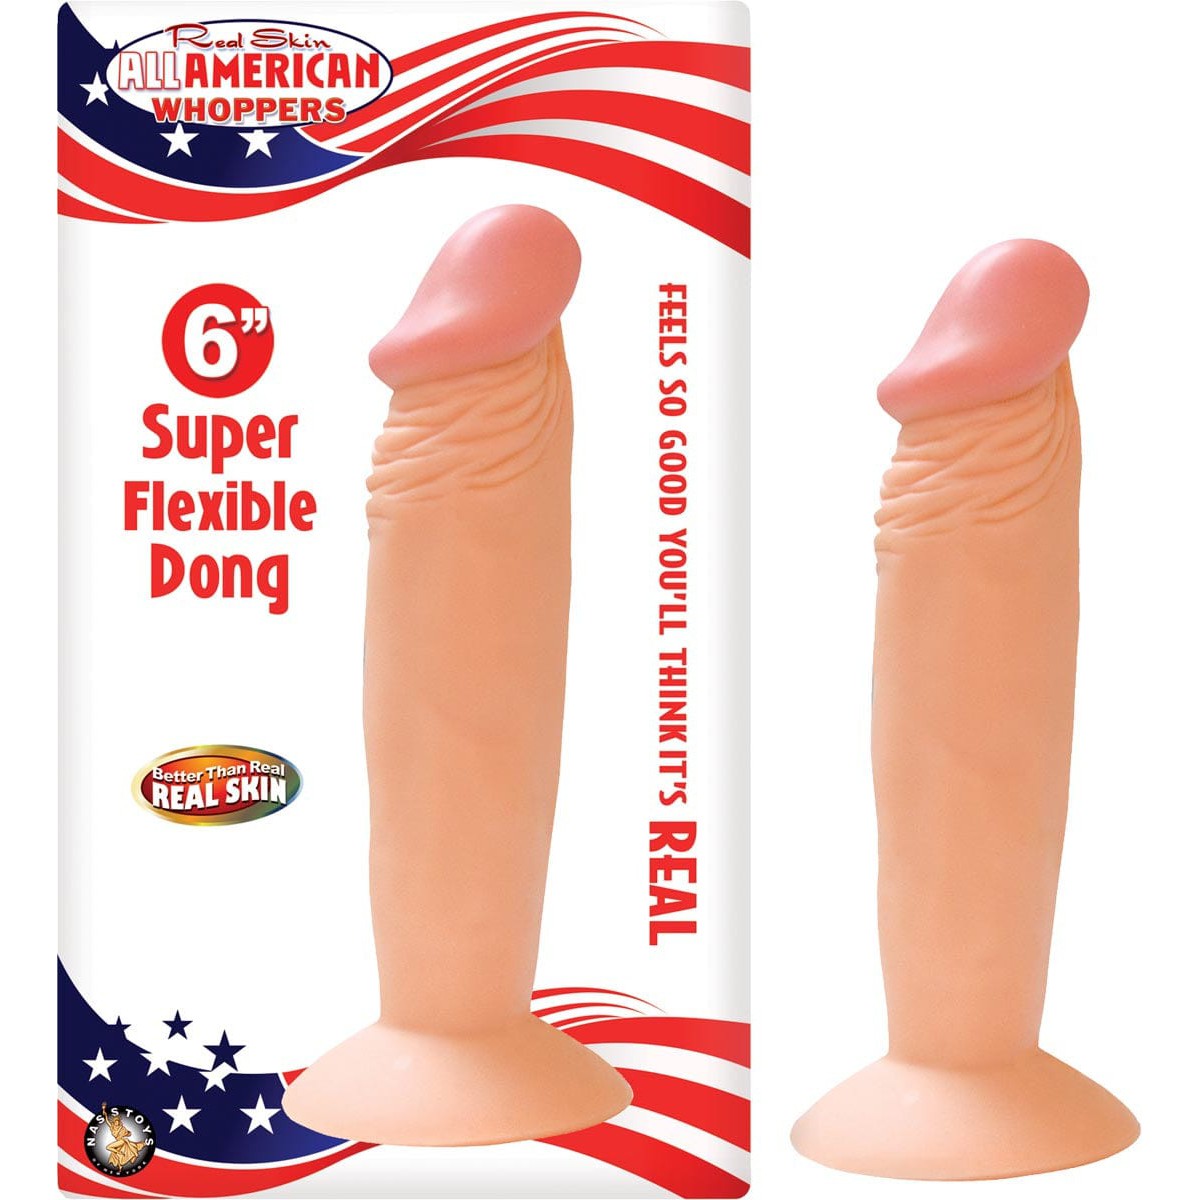 Nasstoys - Real Skin All American Whoppers Super Flexible Dong with Balls Realistic Dildo with suction cup (Non Vibration) 782631223514 CherryAffairs